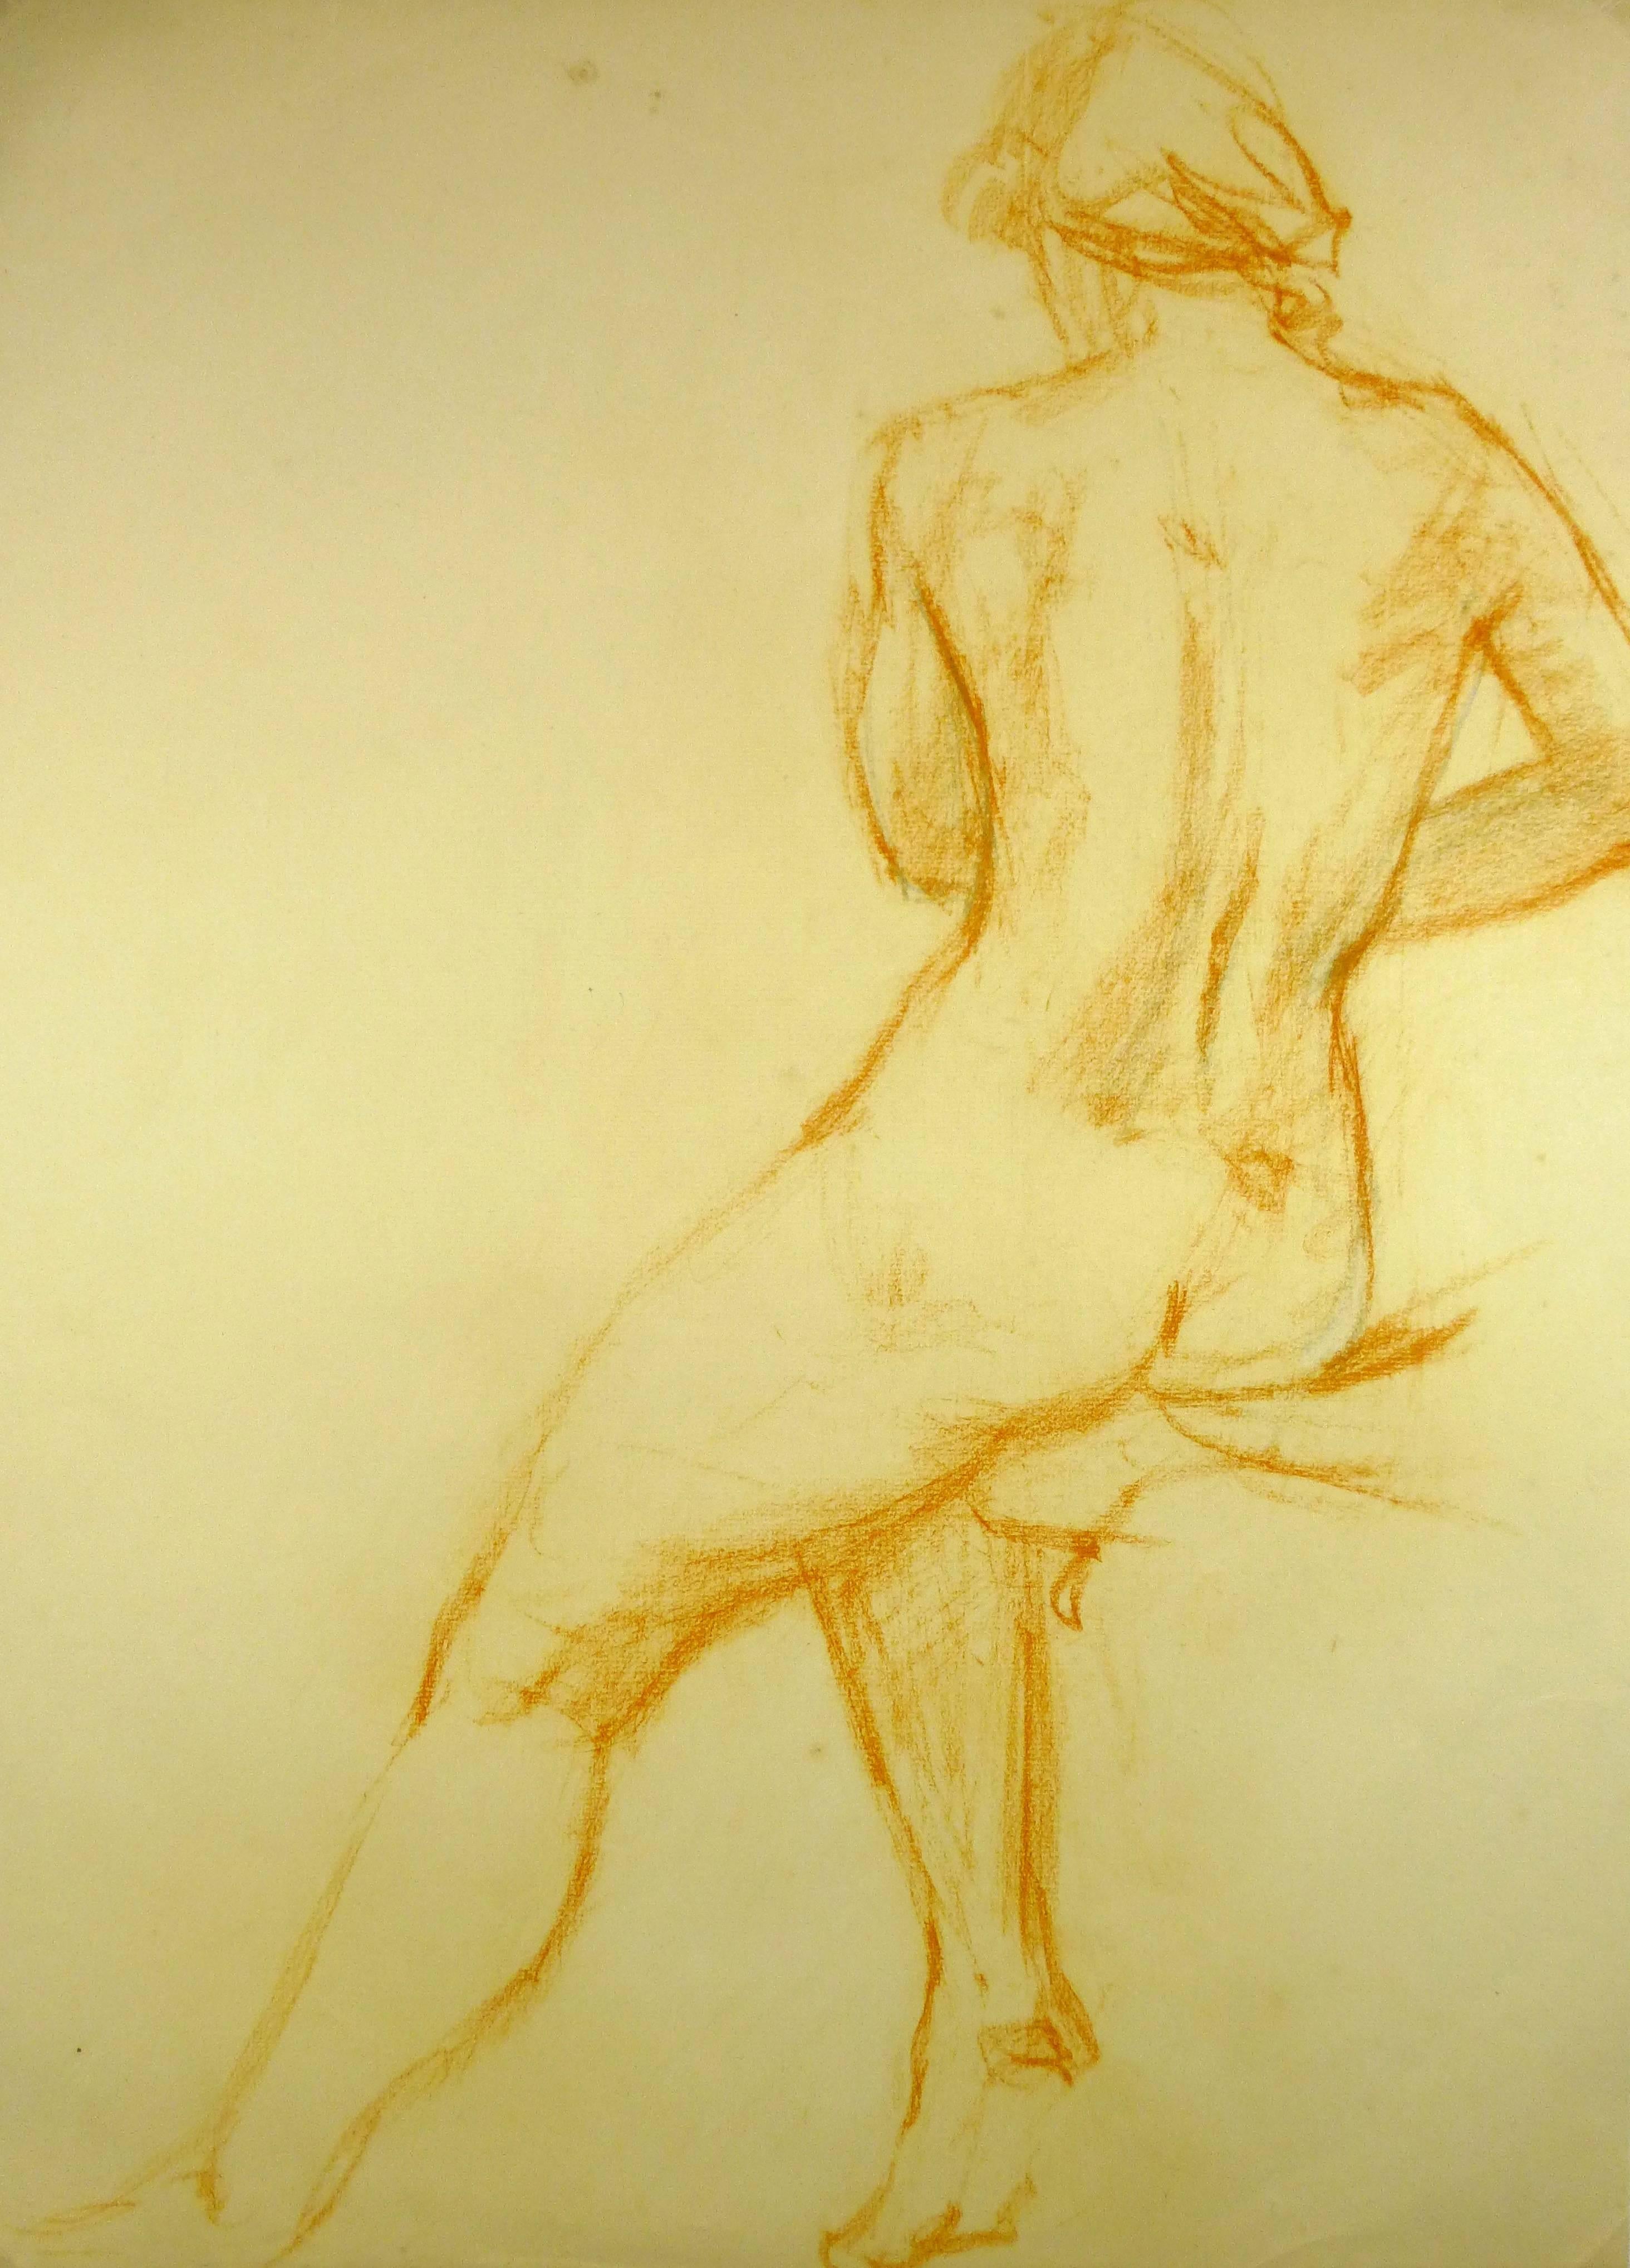 Nude from Behind in Orange Pastel - Art by Unknown